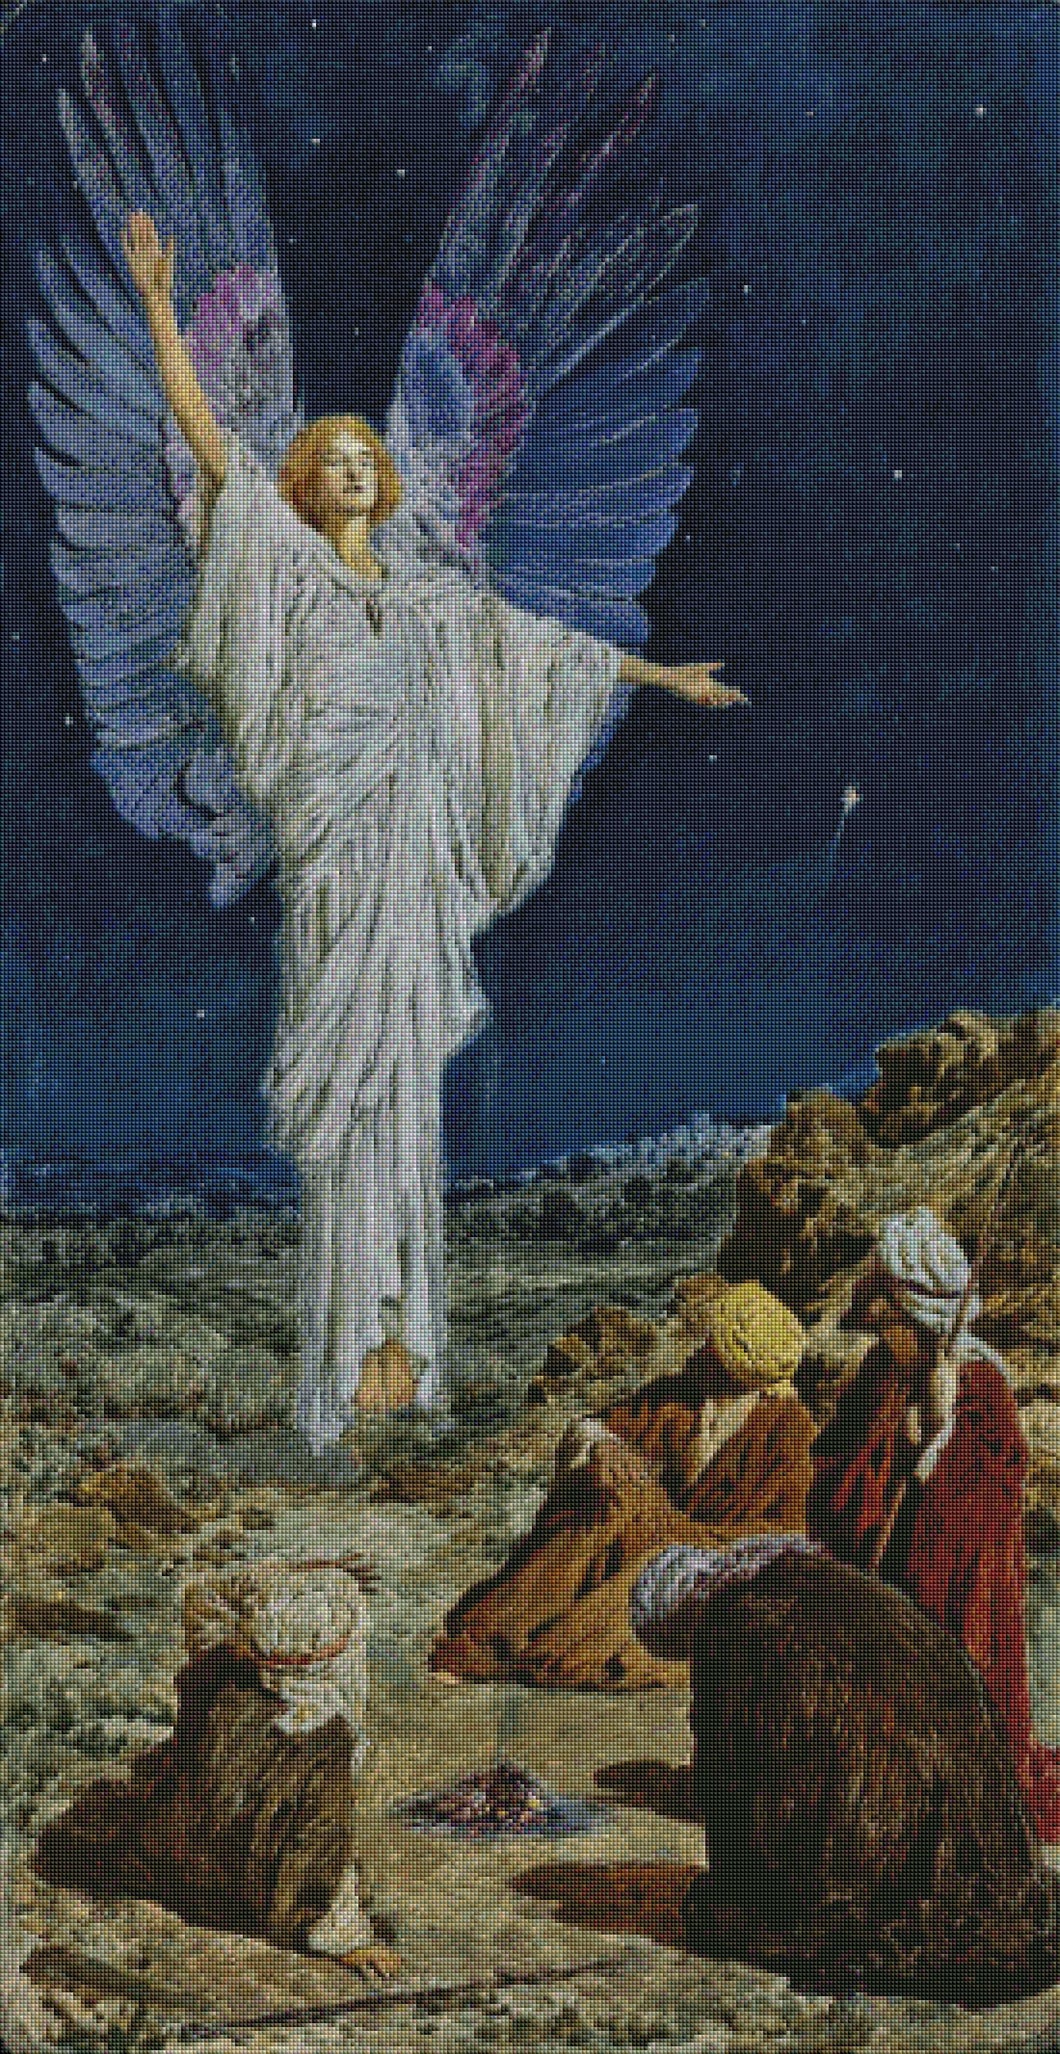 *PREORDER* The Angel Appearing to the Shepherds by William Henry Margetson